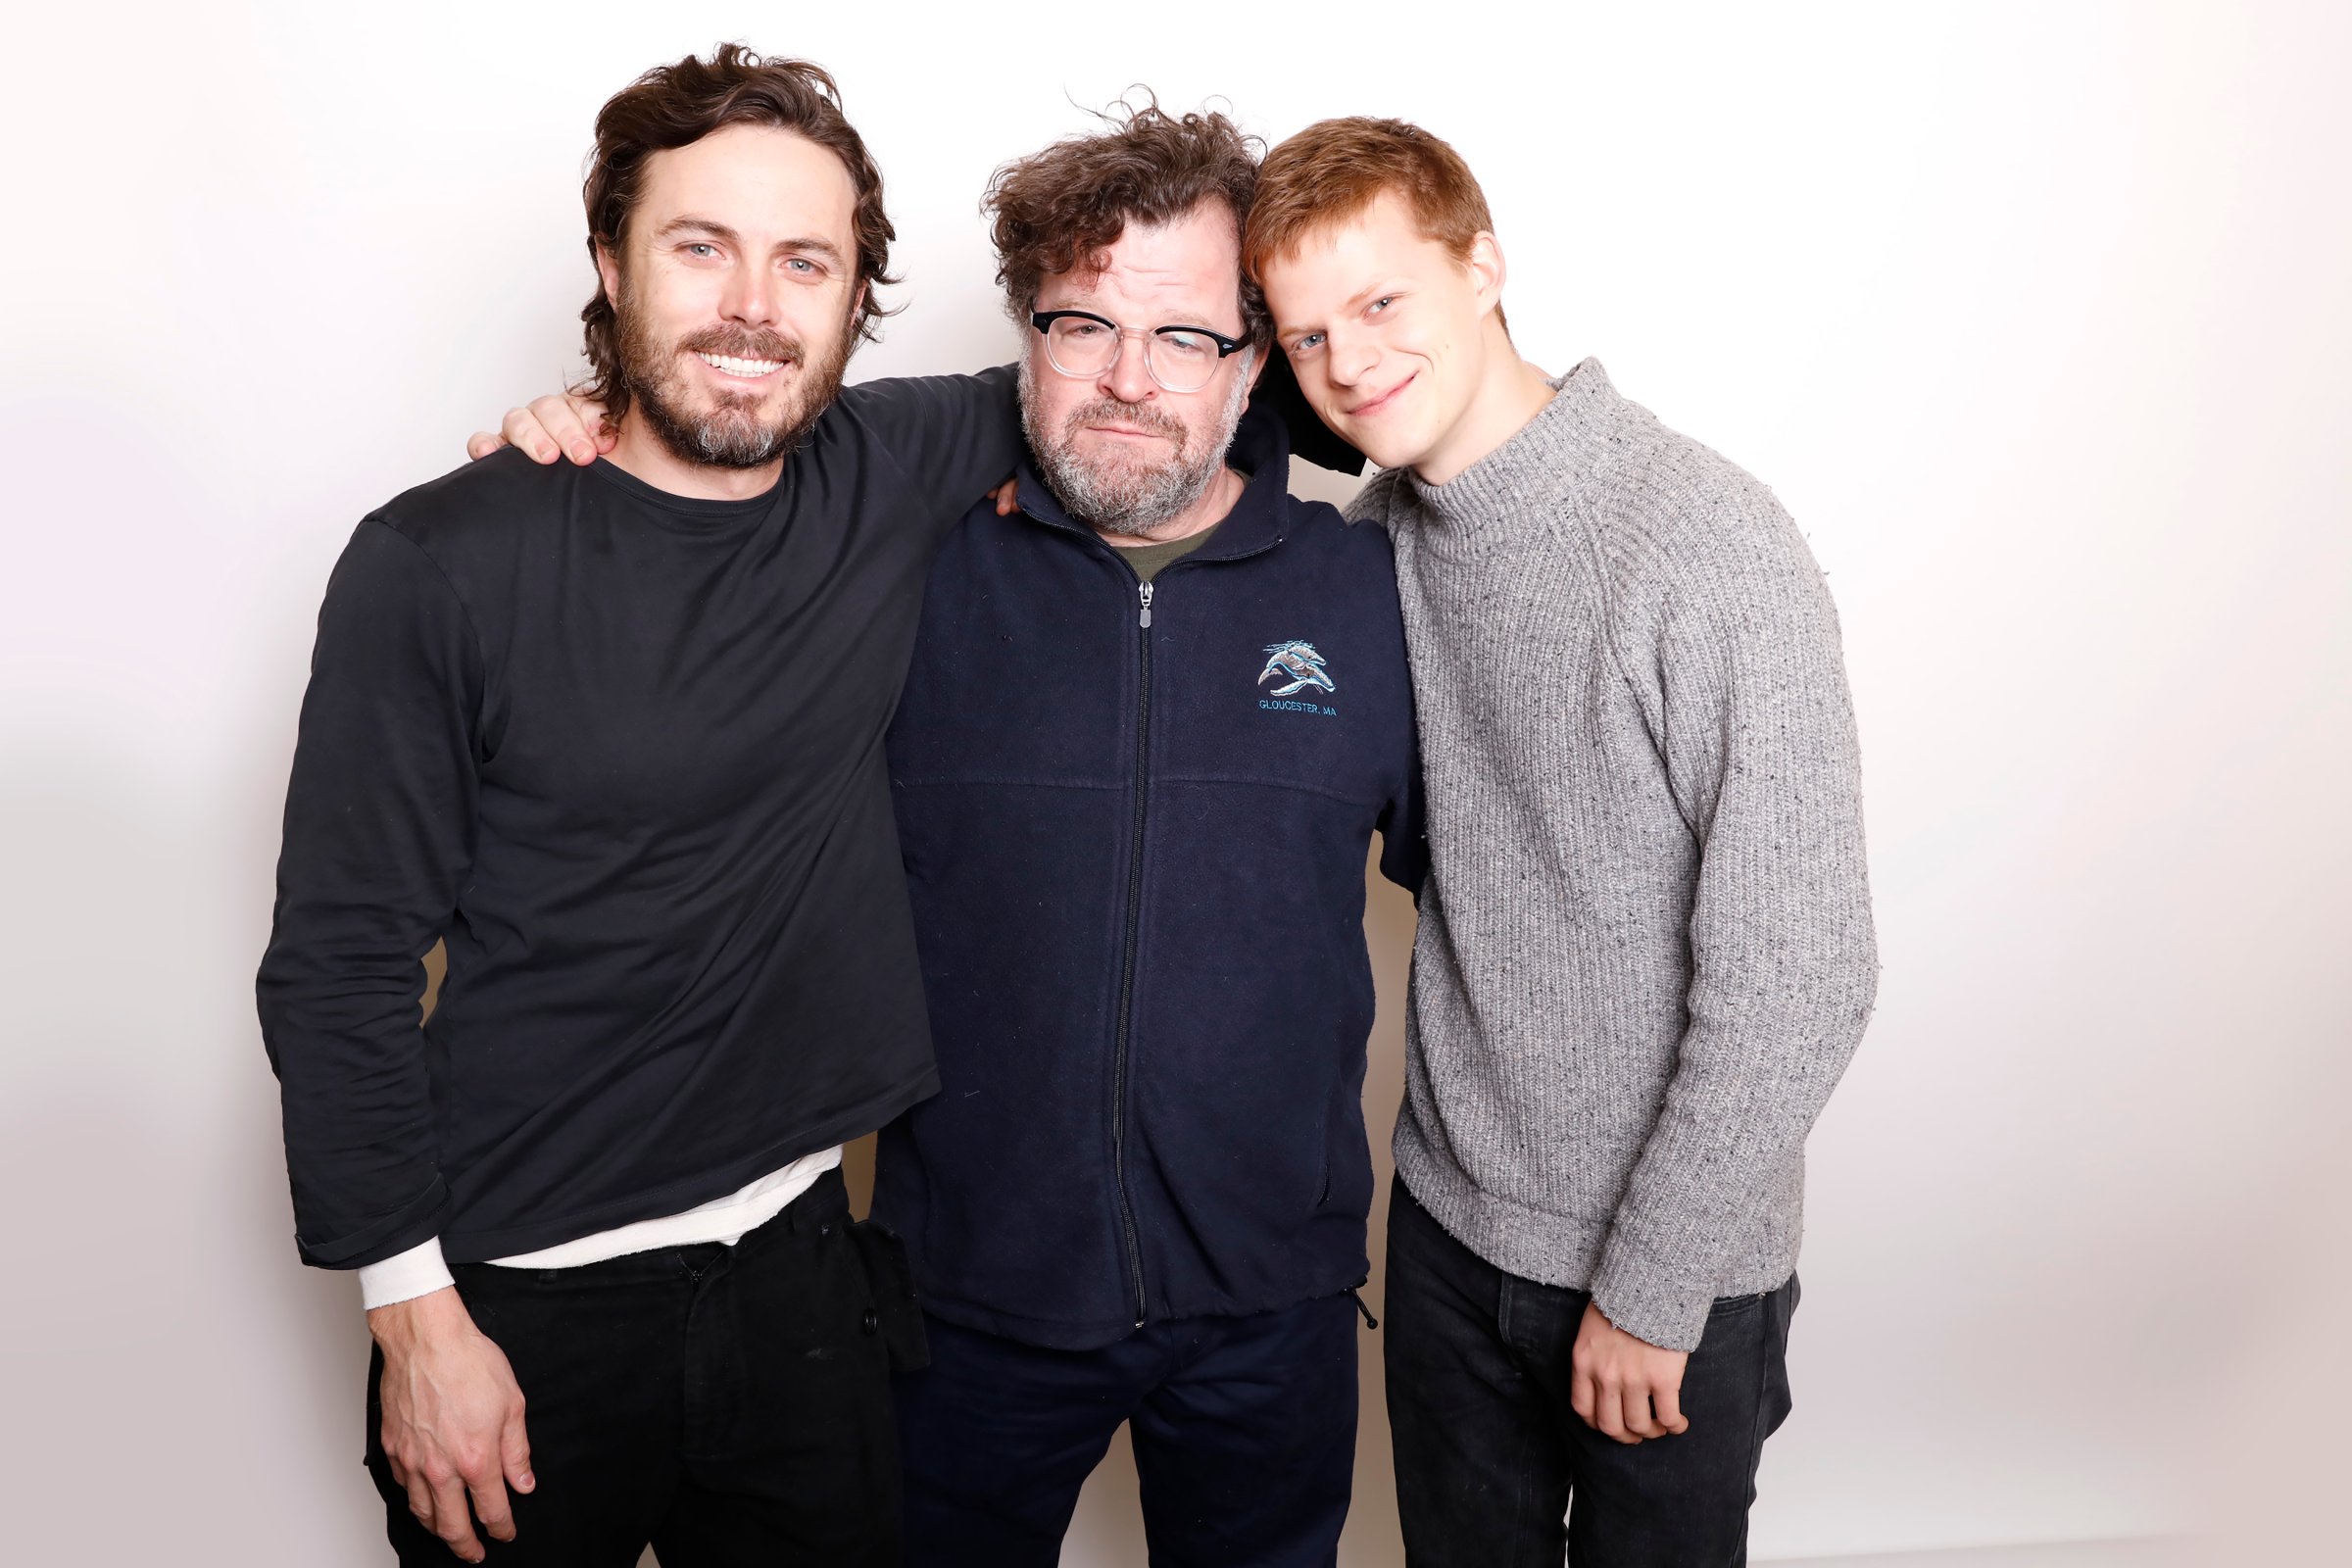 Director Kenneth Lonergan poses with actors Casey Affleck, left, and Lucas Hedges for a portrait to promote the film "Manchester by the Sea" during the Sundance Film Festival on Jan. 24, 2016 in Park City, Utah.